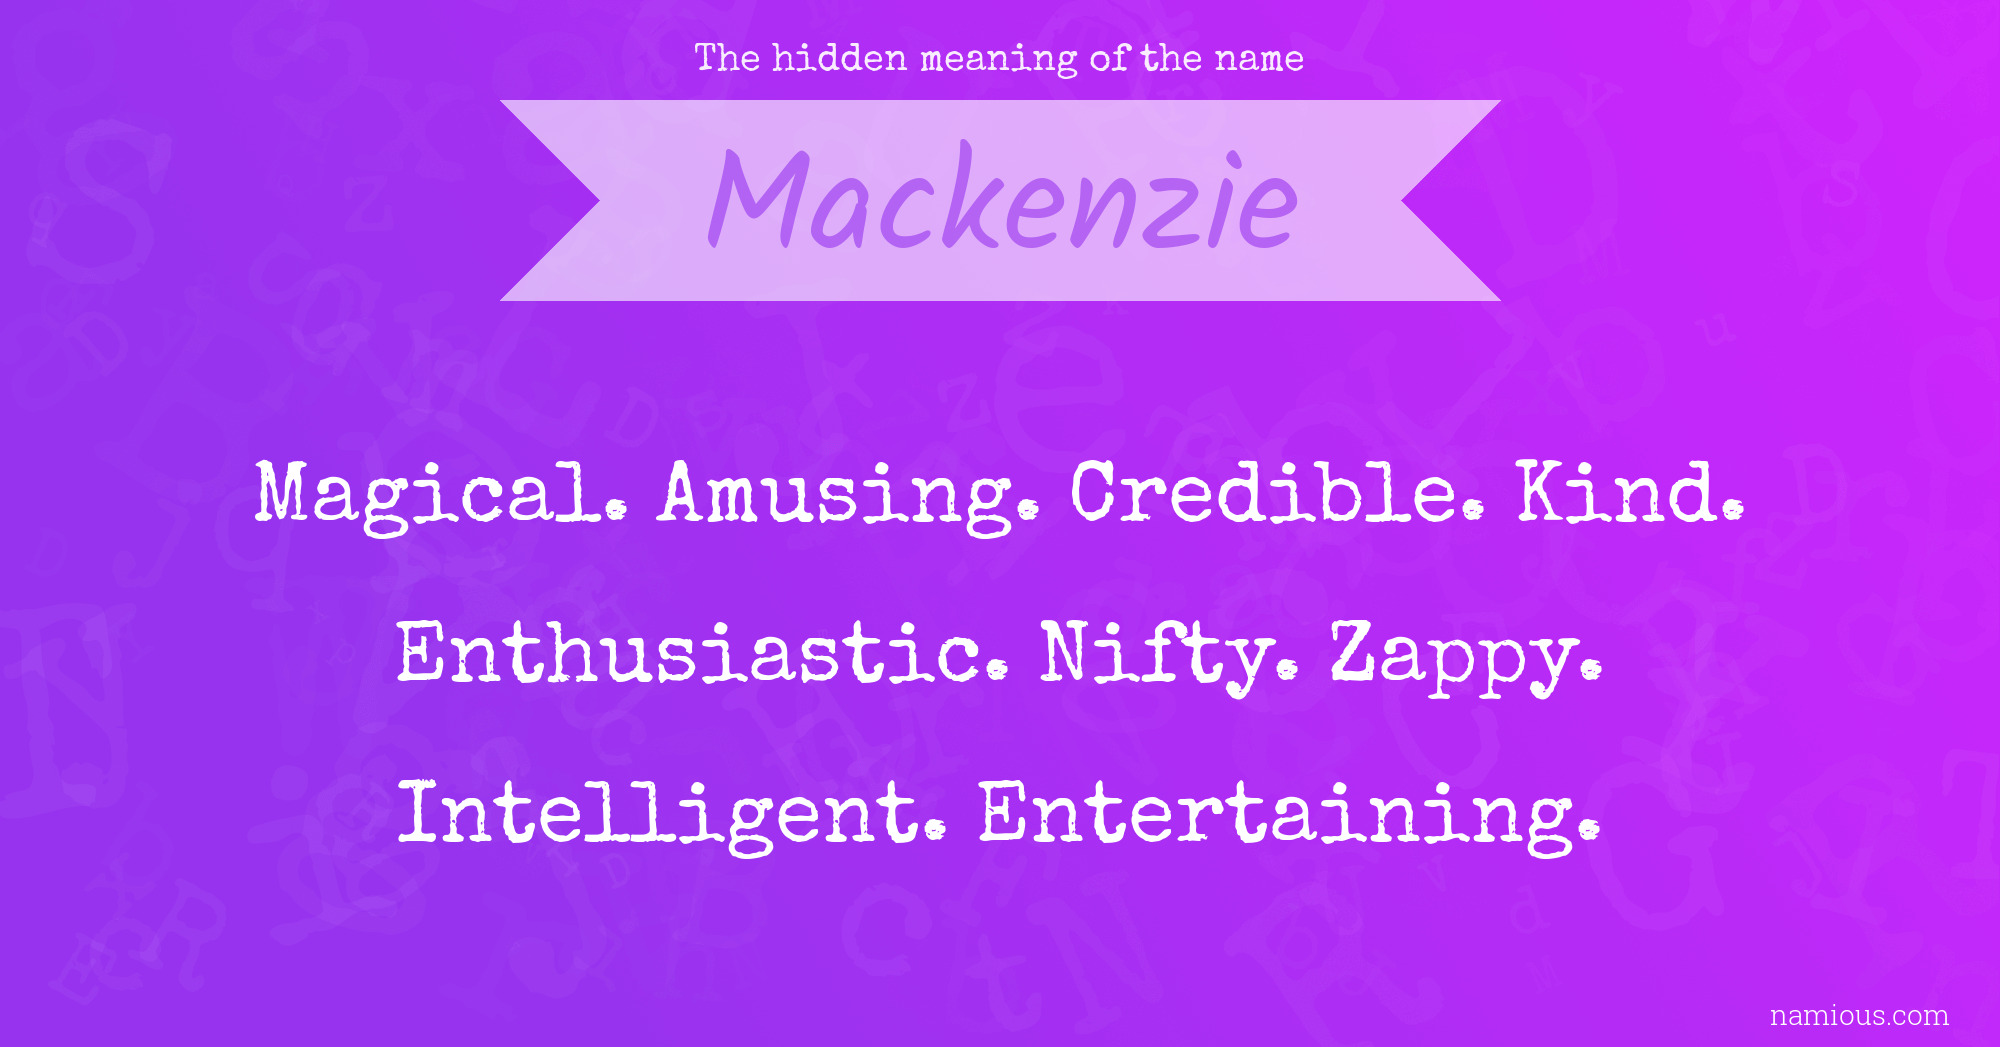 The hidden meaning of the name Mackenzie